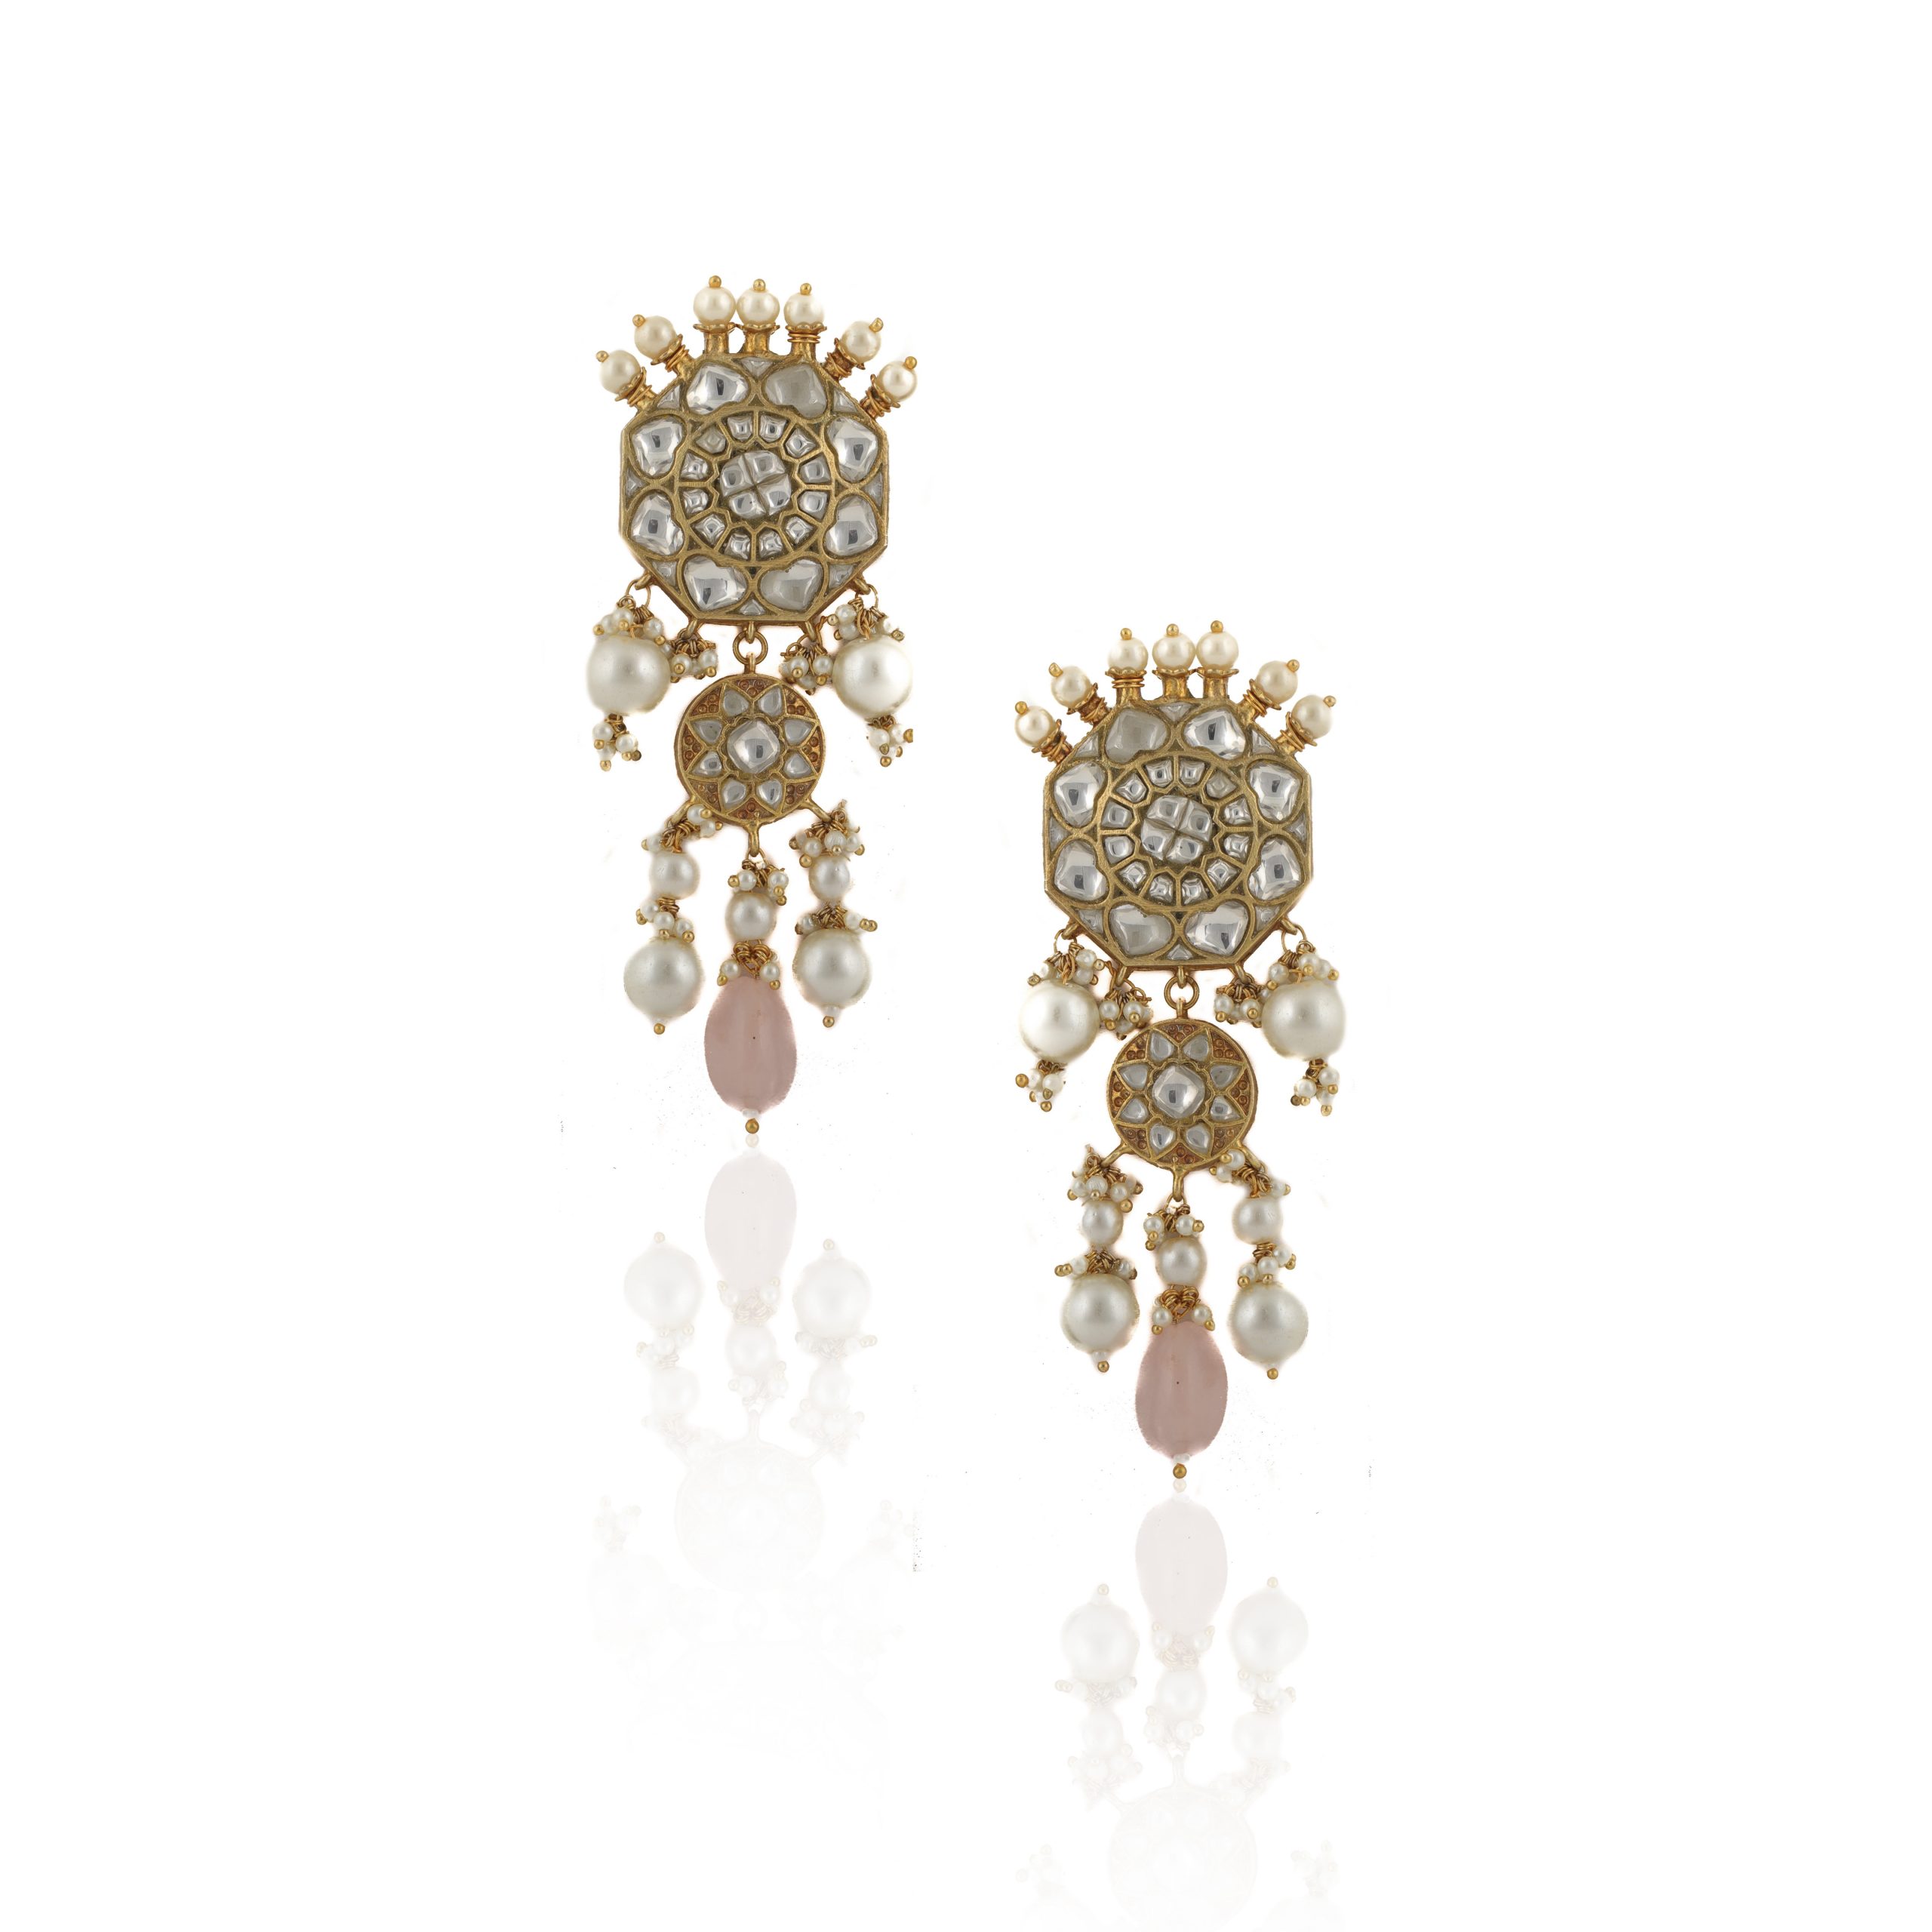 Maroon and White Stone Studded Earring Online Shopping: JDV334 | Online  earrings, Indian jewelry, Jewelry